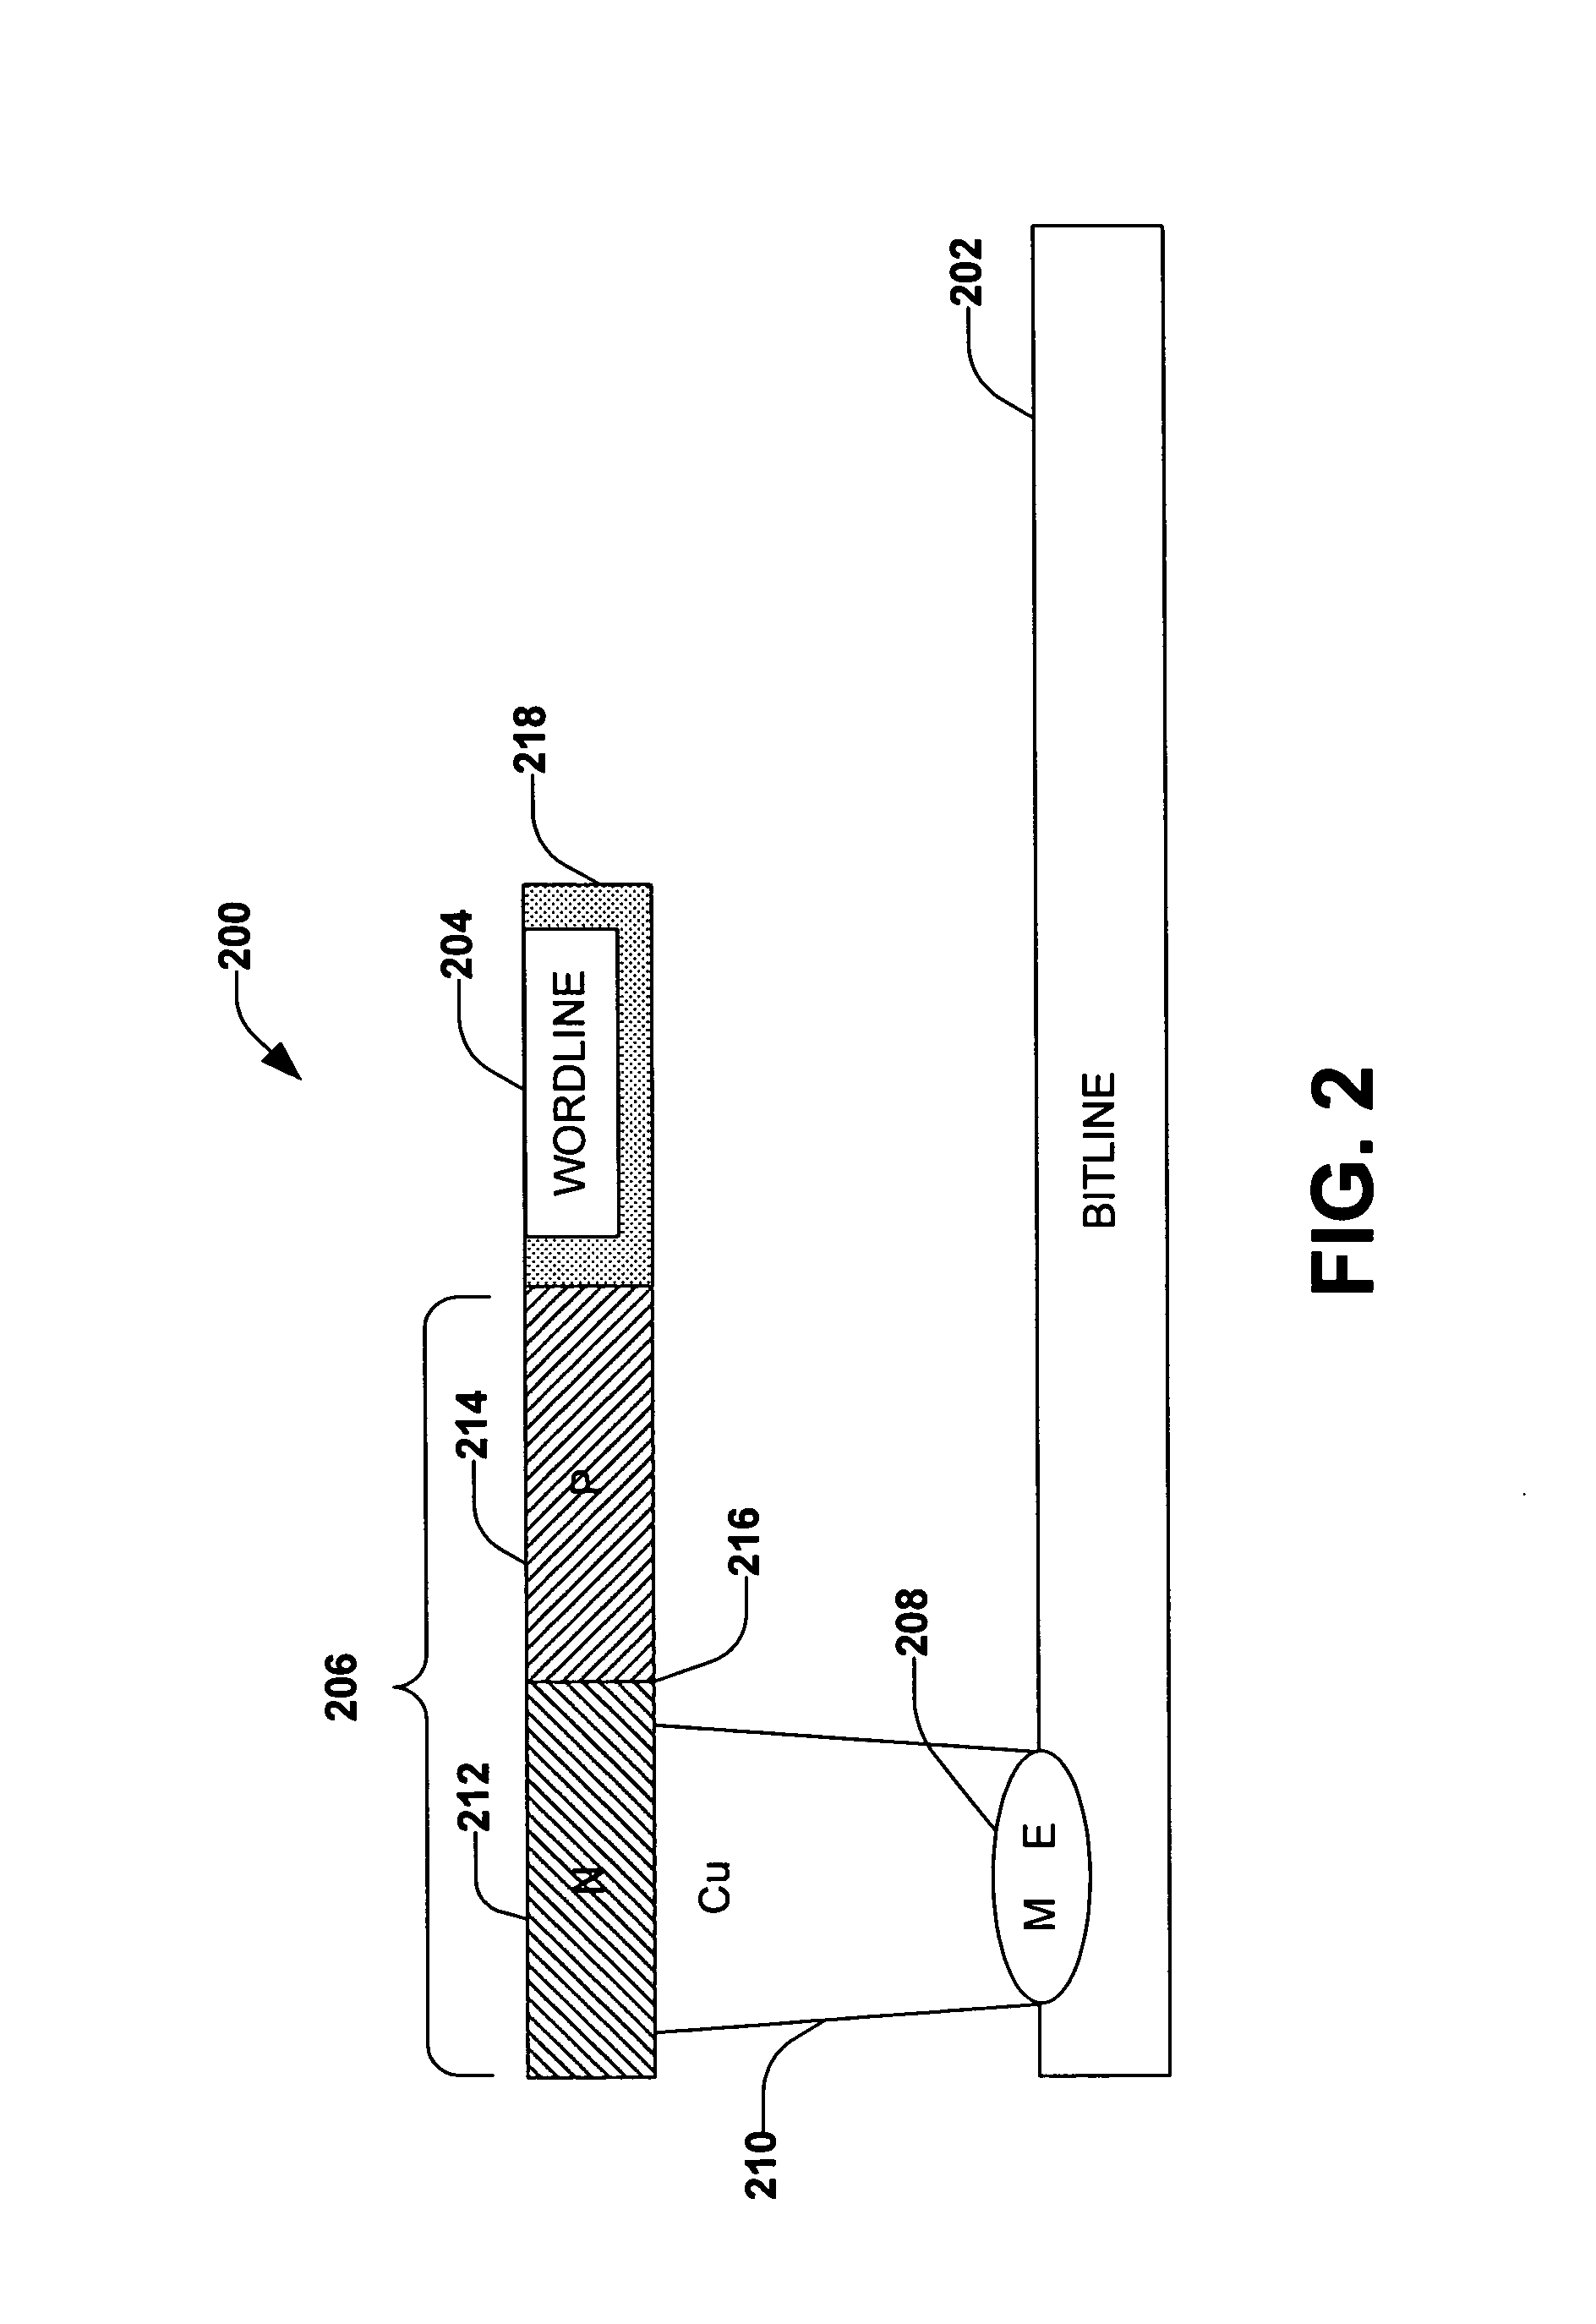 Memory device with a selection element and a control line in a substantially similar layer